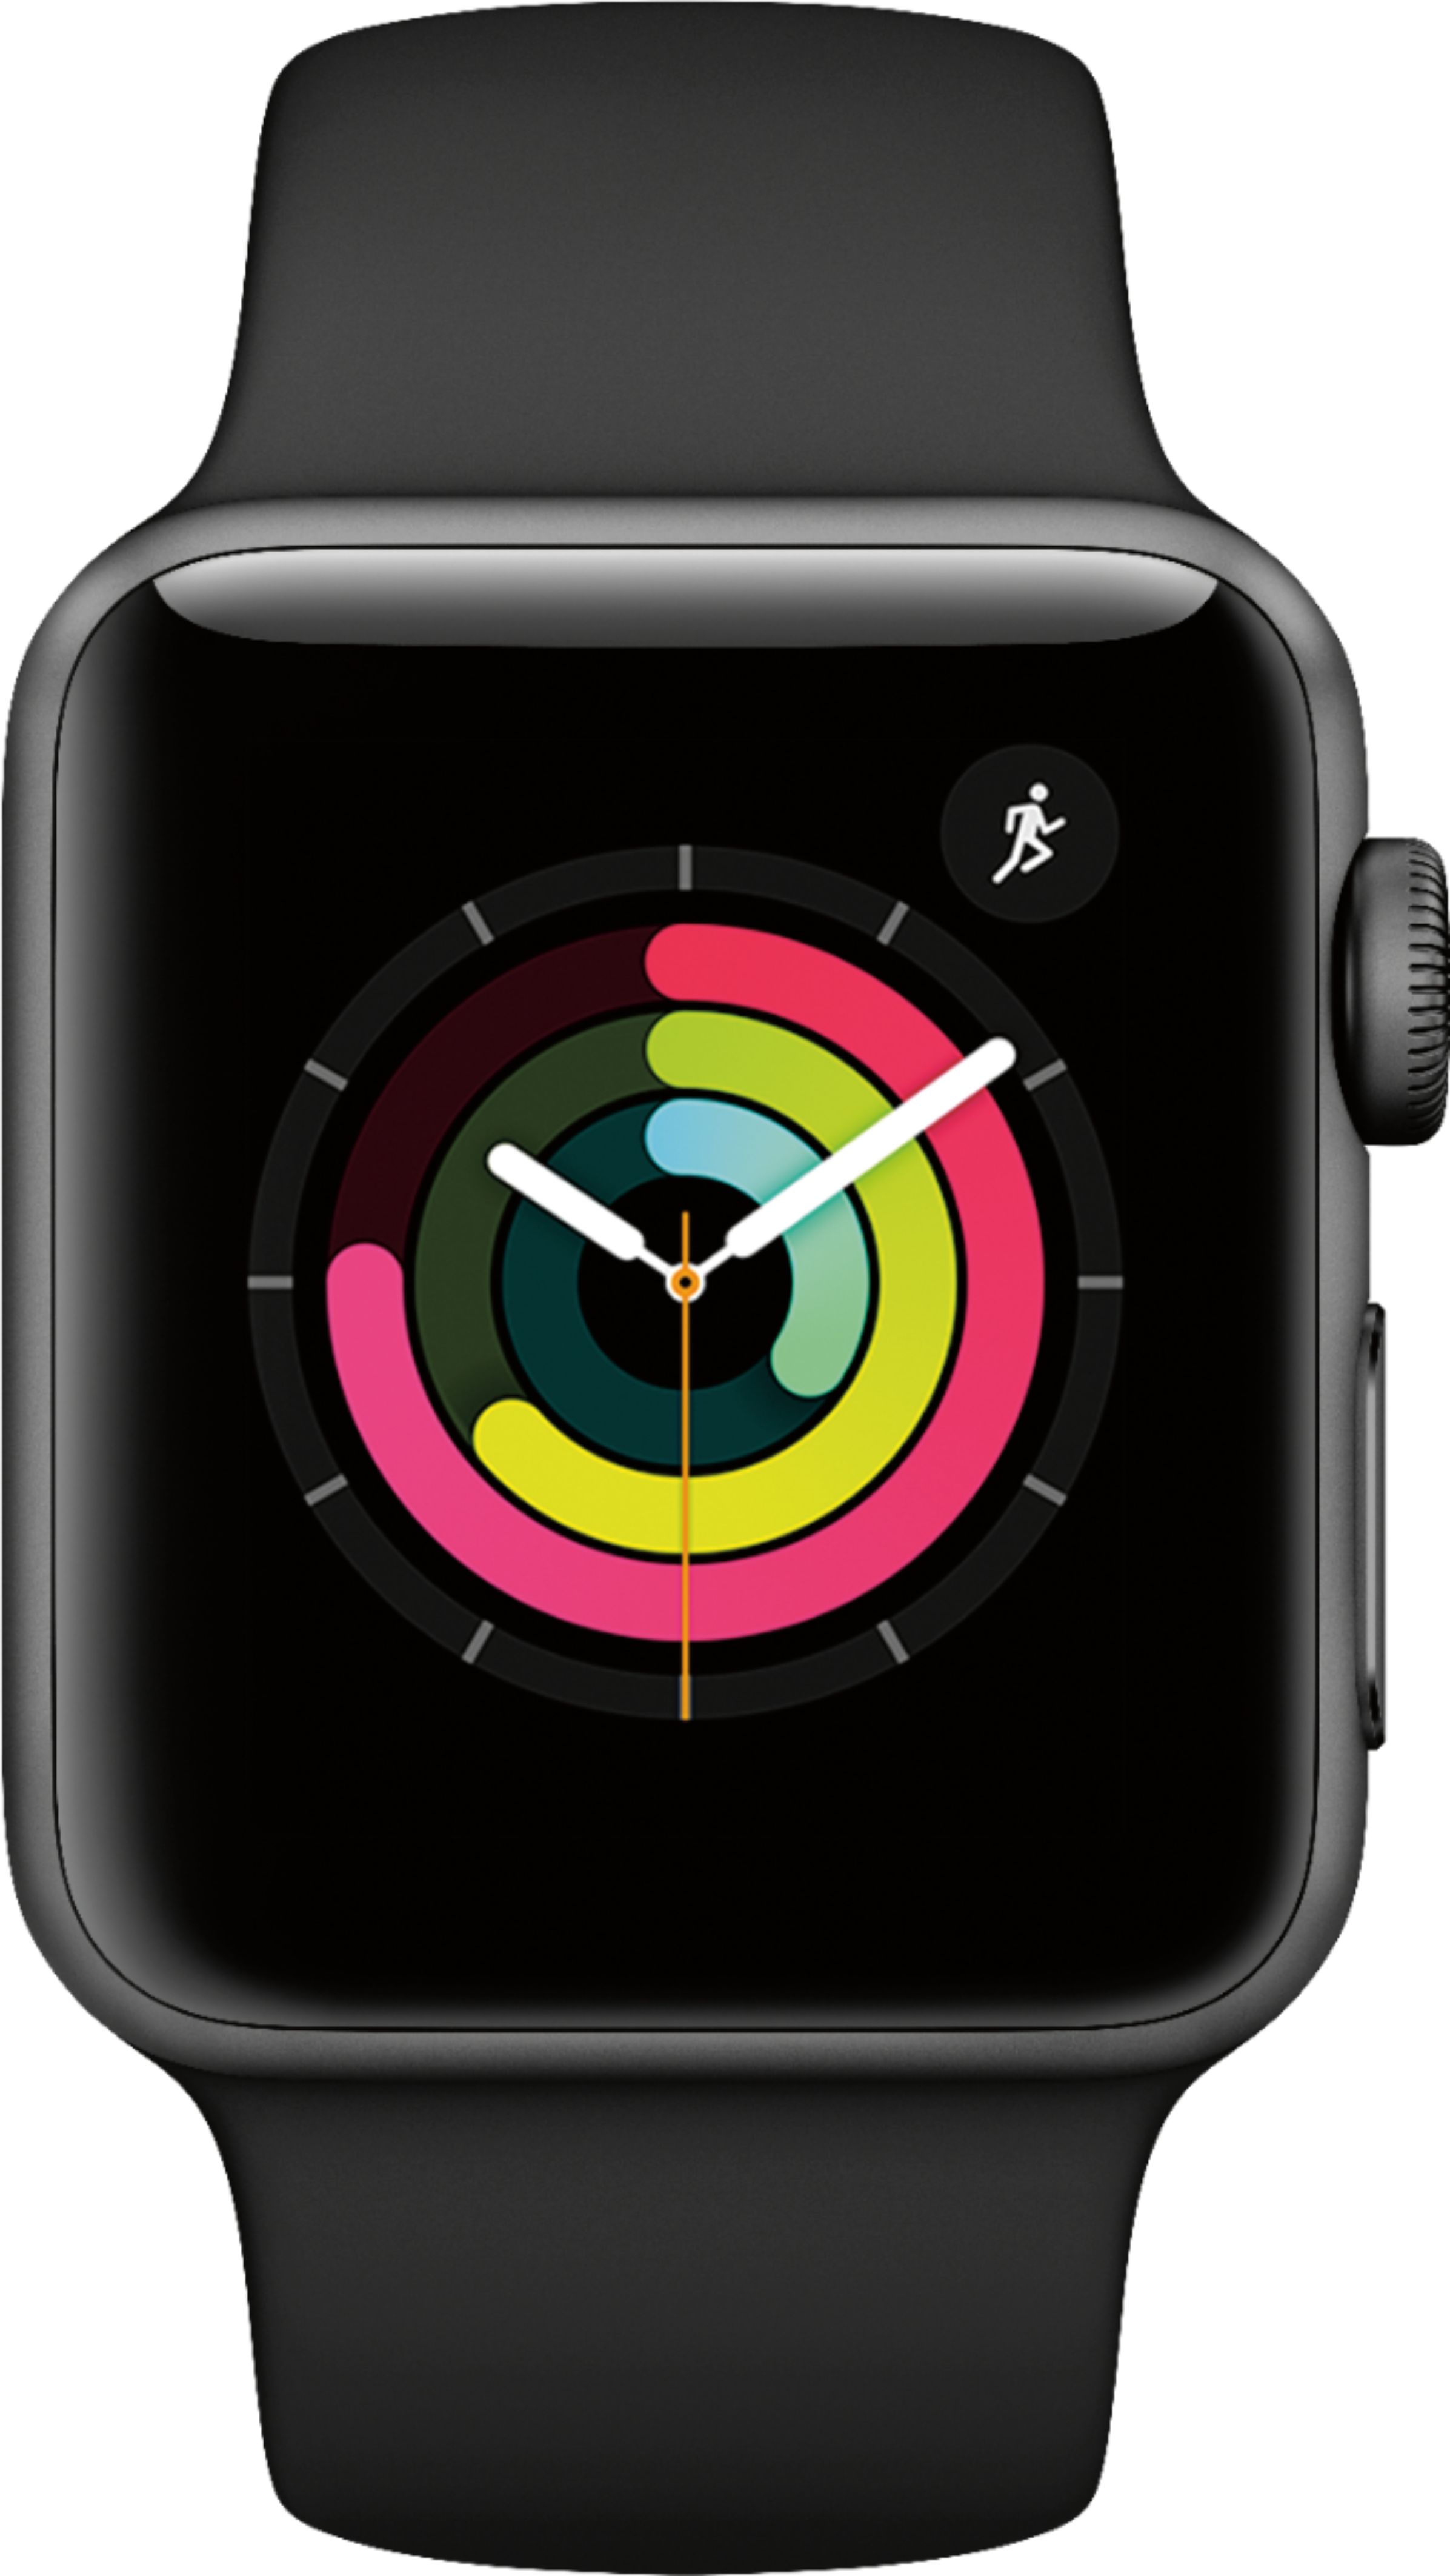 PC/タブレット PC周辺機器 Best Buy: Apple Watch Series 3 (GPS) 38mm Aluminum Case with Black 